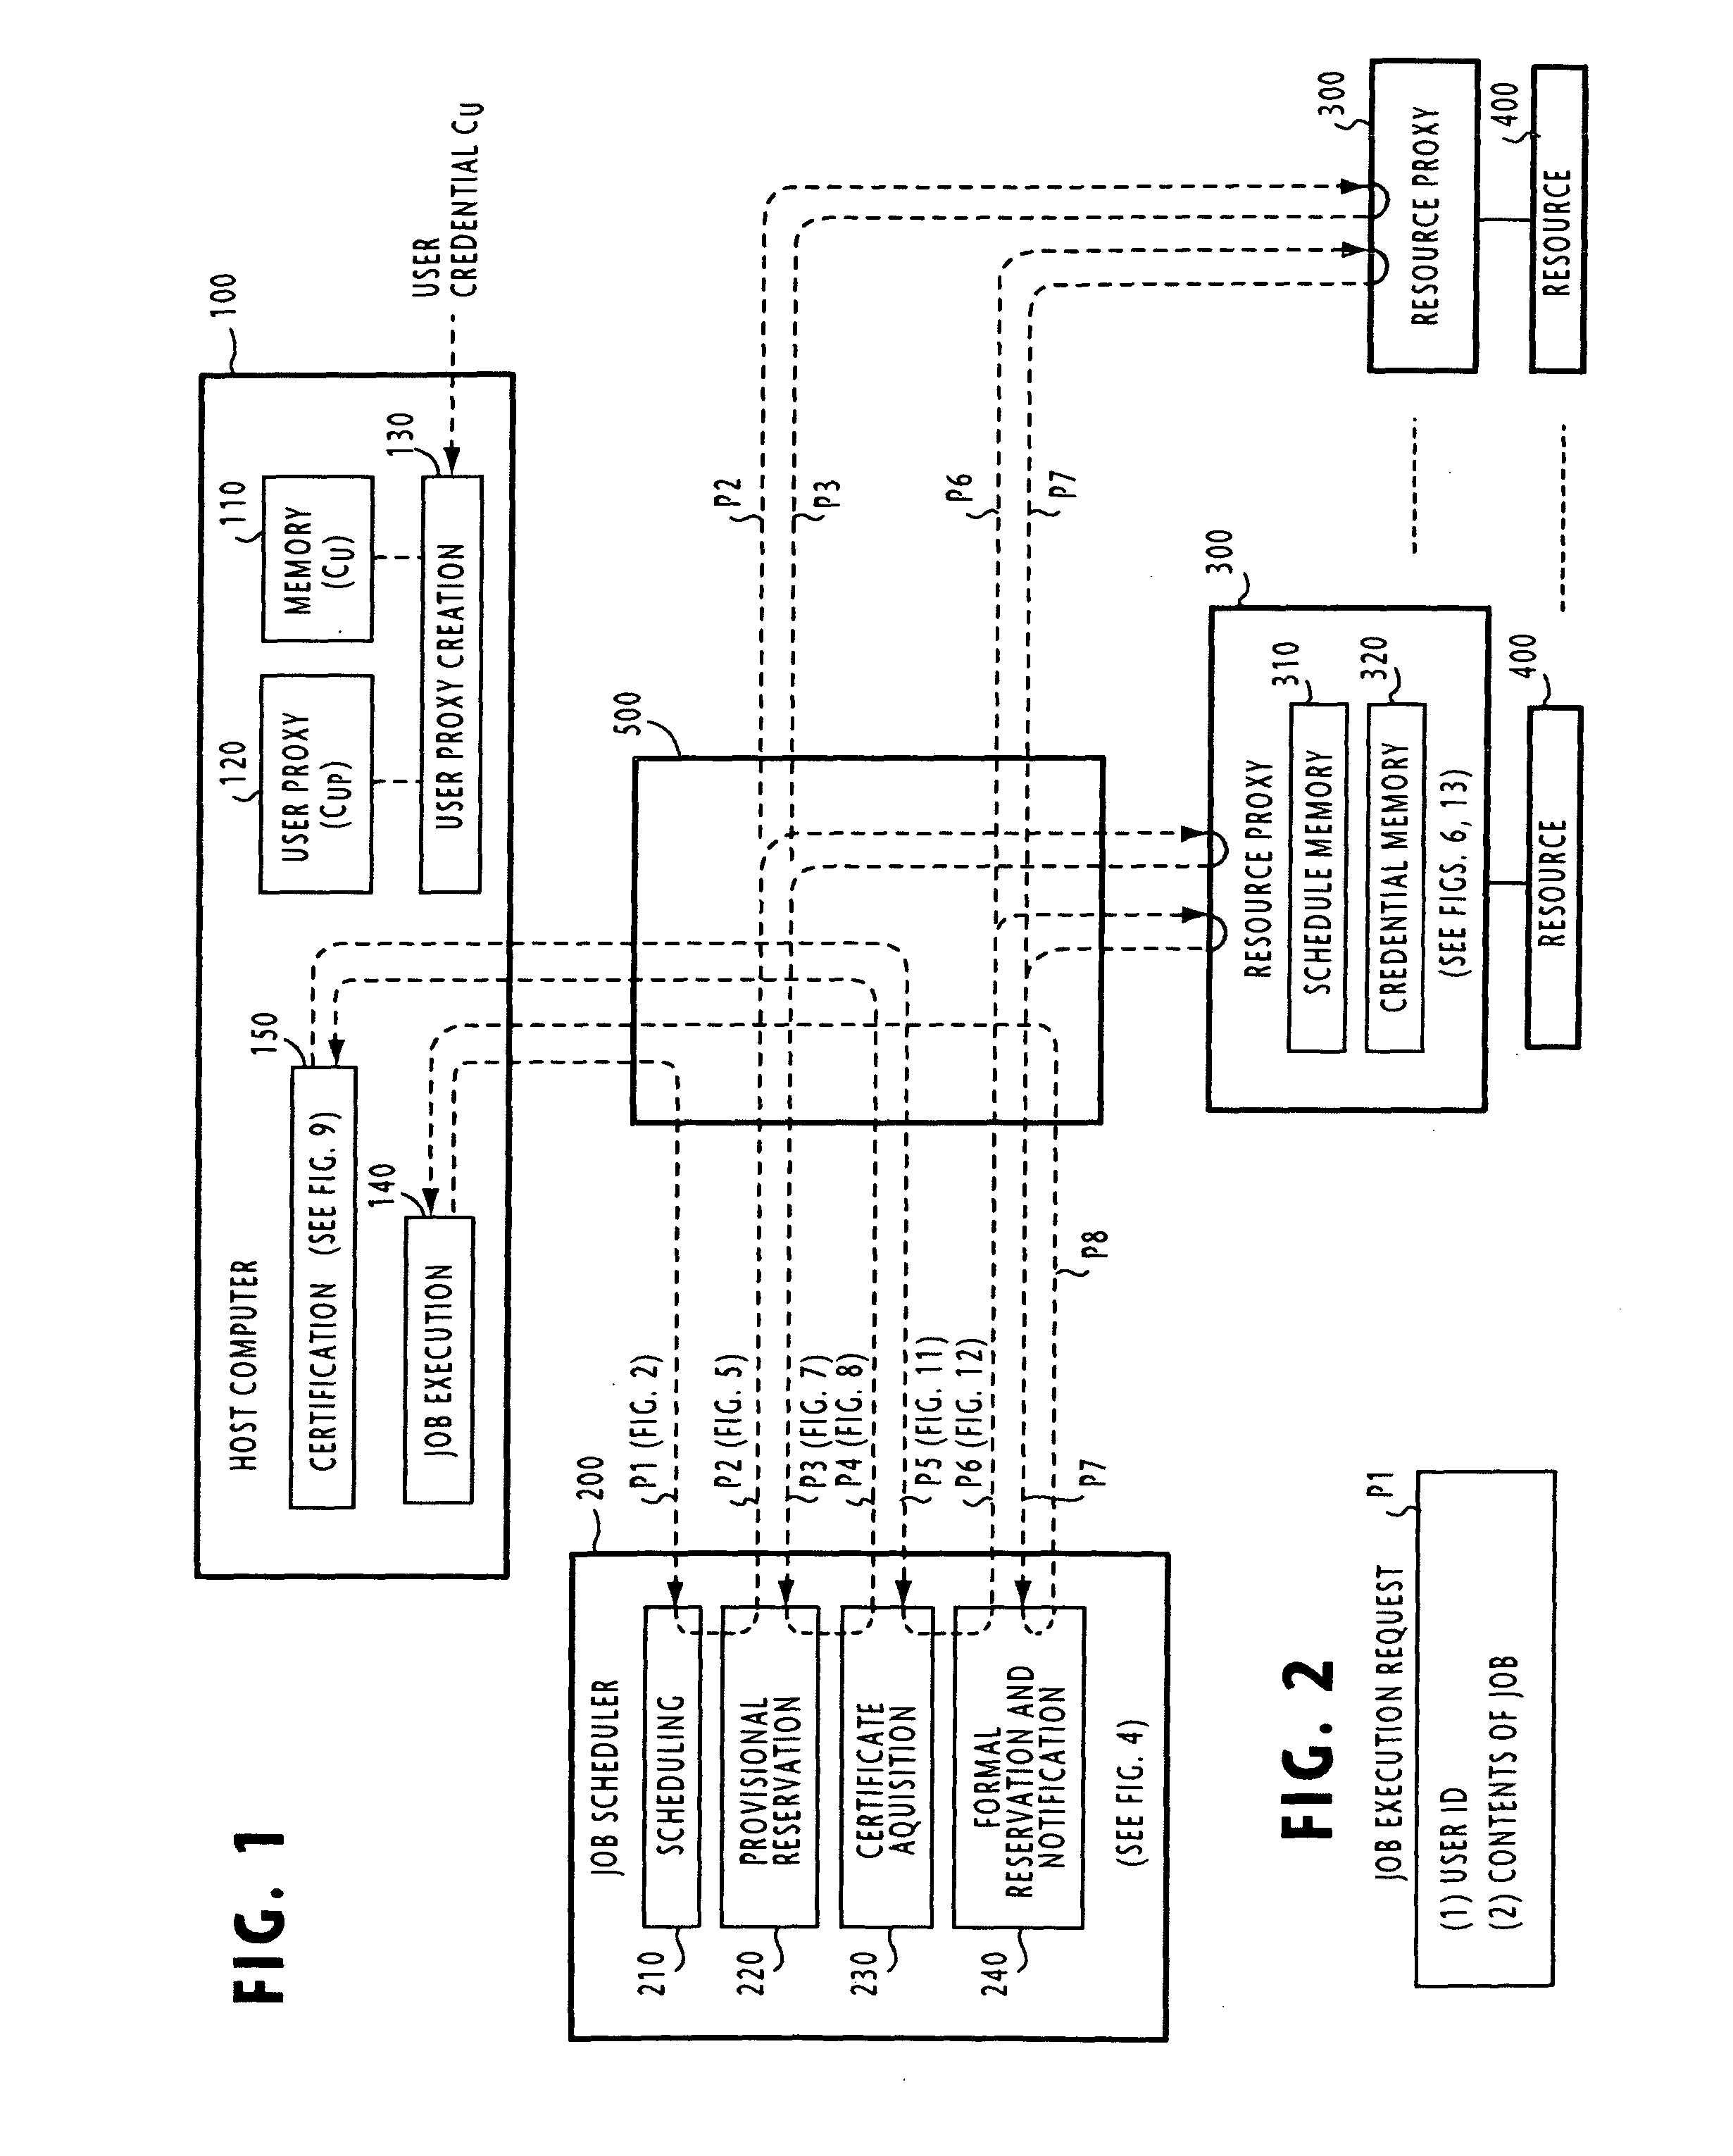 Distributed computing system for resource reservation and user verification